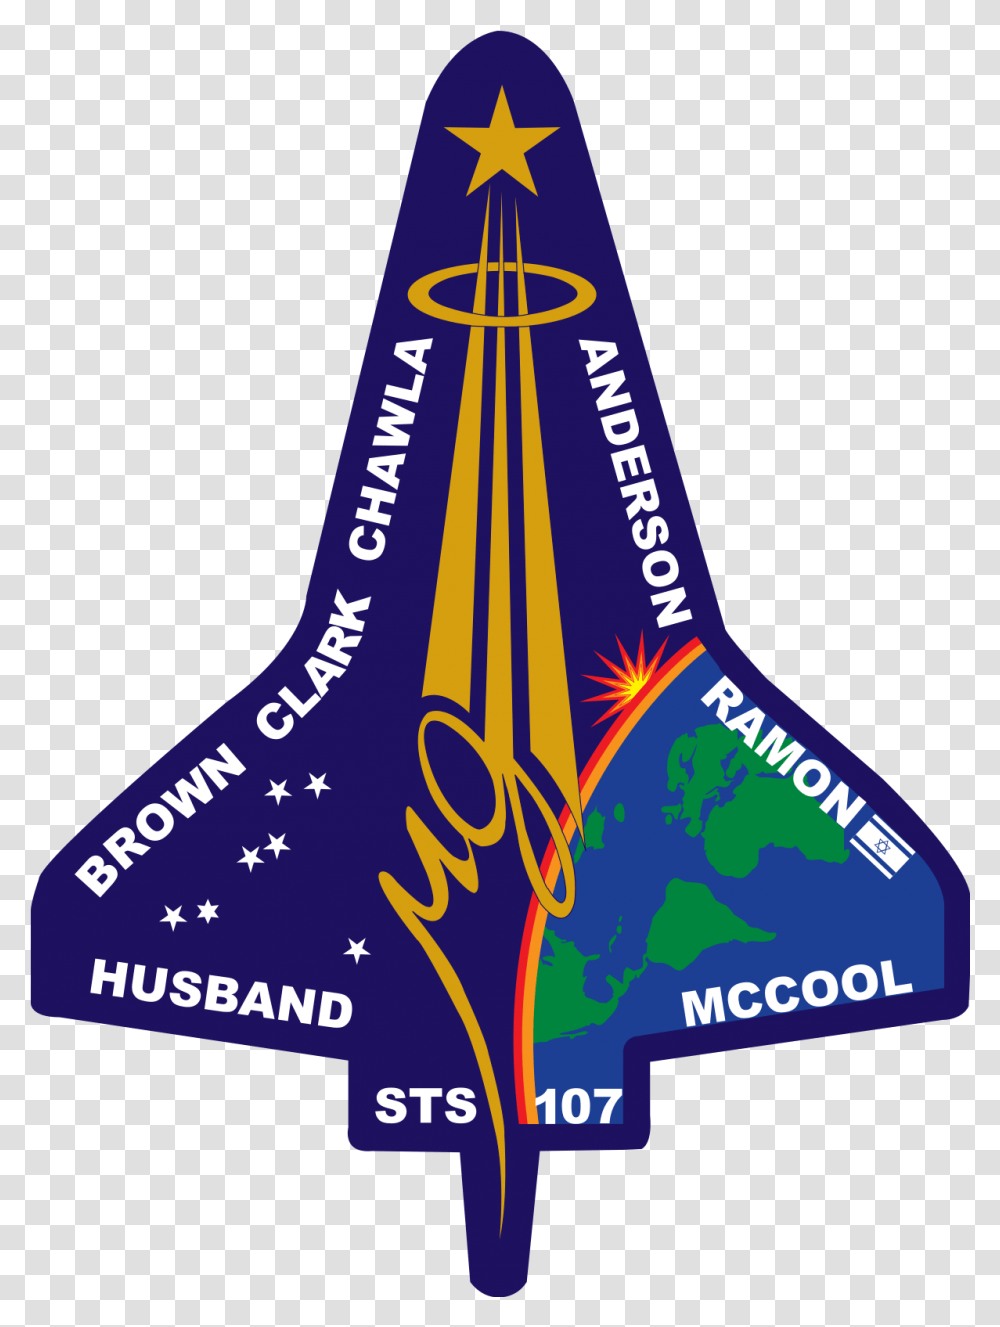 Space Shuttle Columbia Disaster Wikipedia Space Shuttle Columbia Mission Patch, Plot, Diagram, Text, Symbol Transparent Png